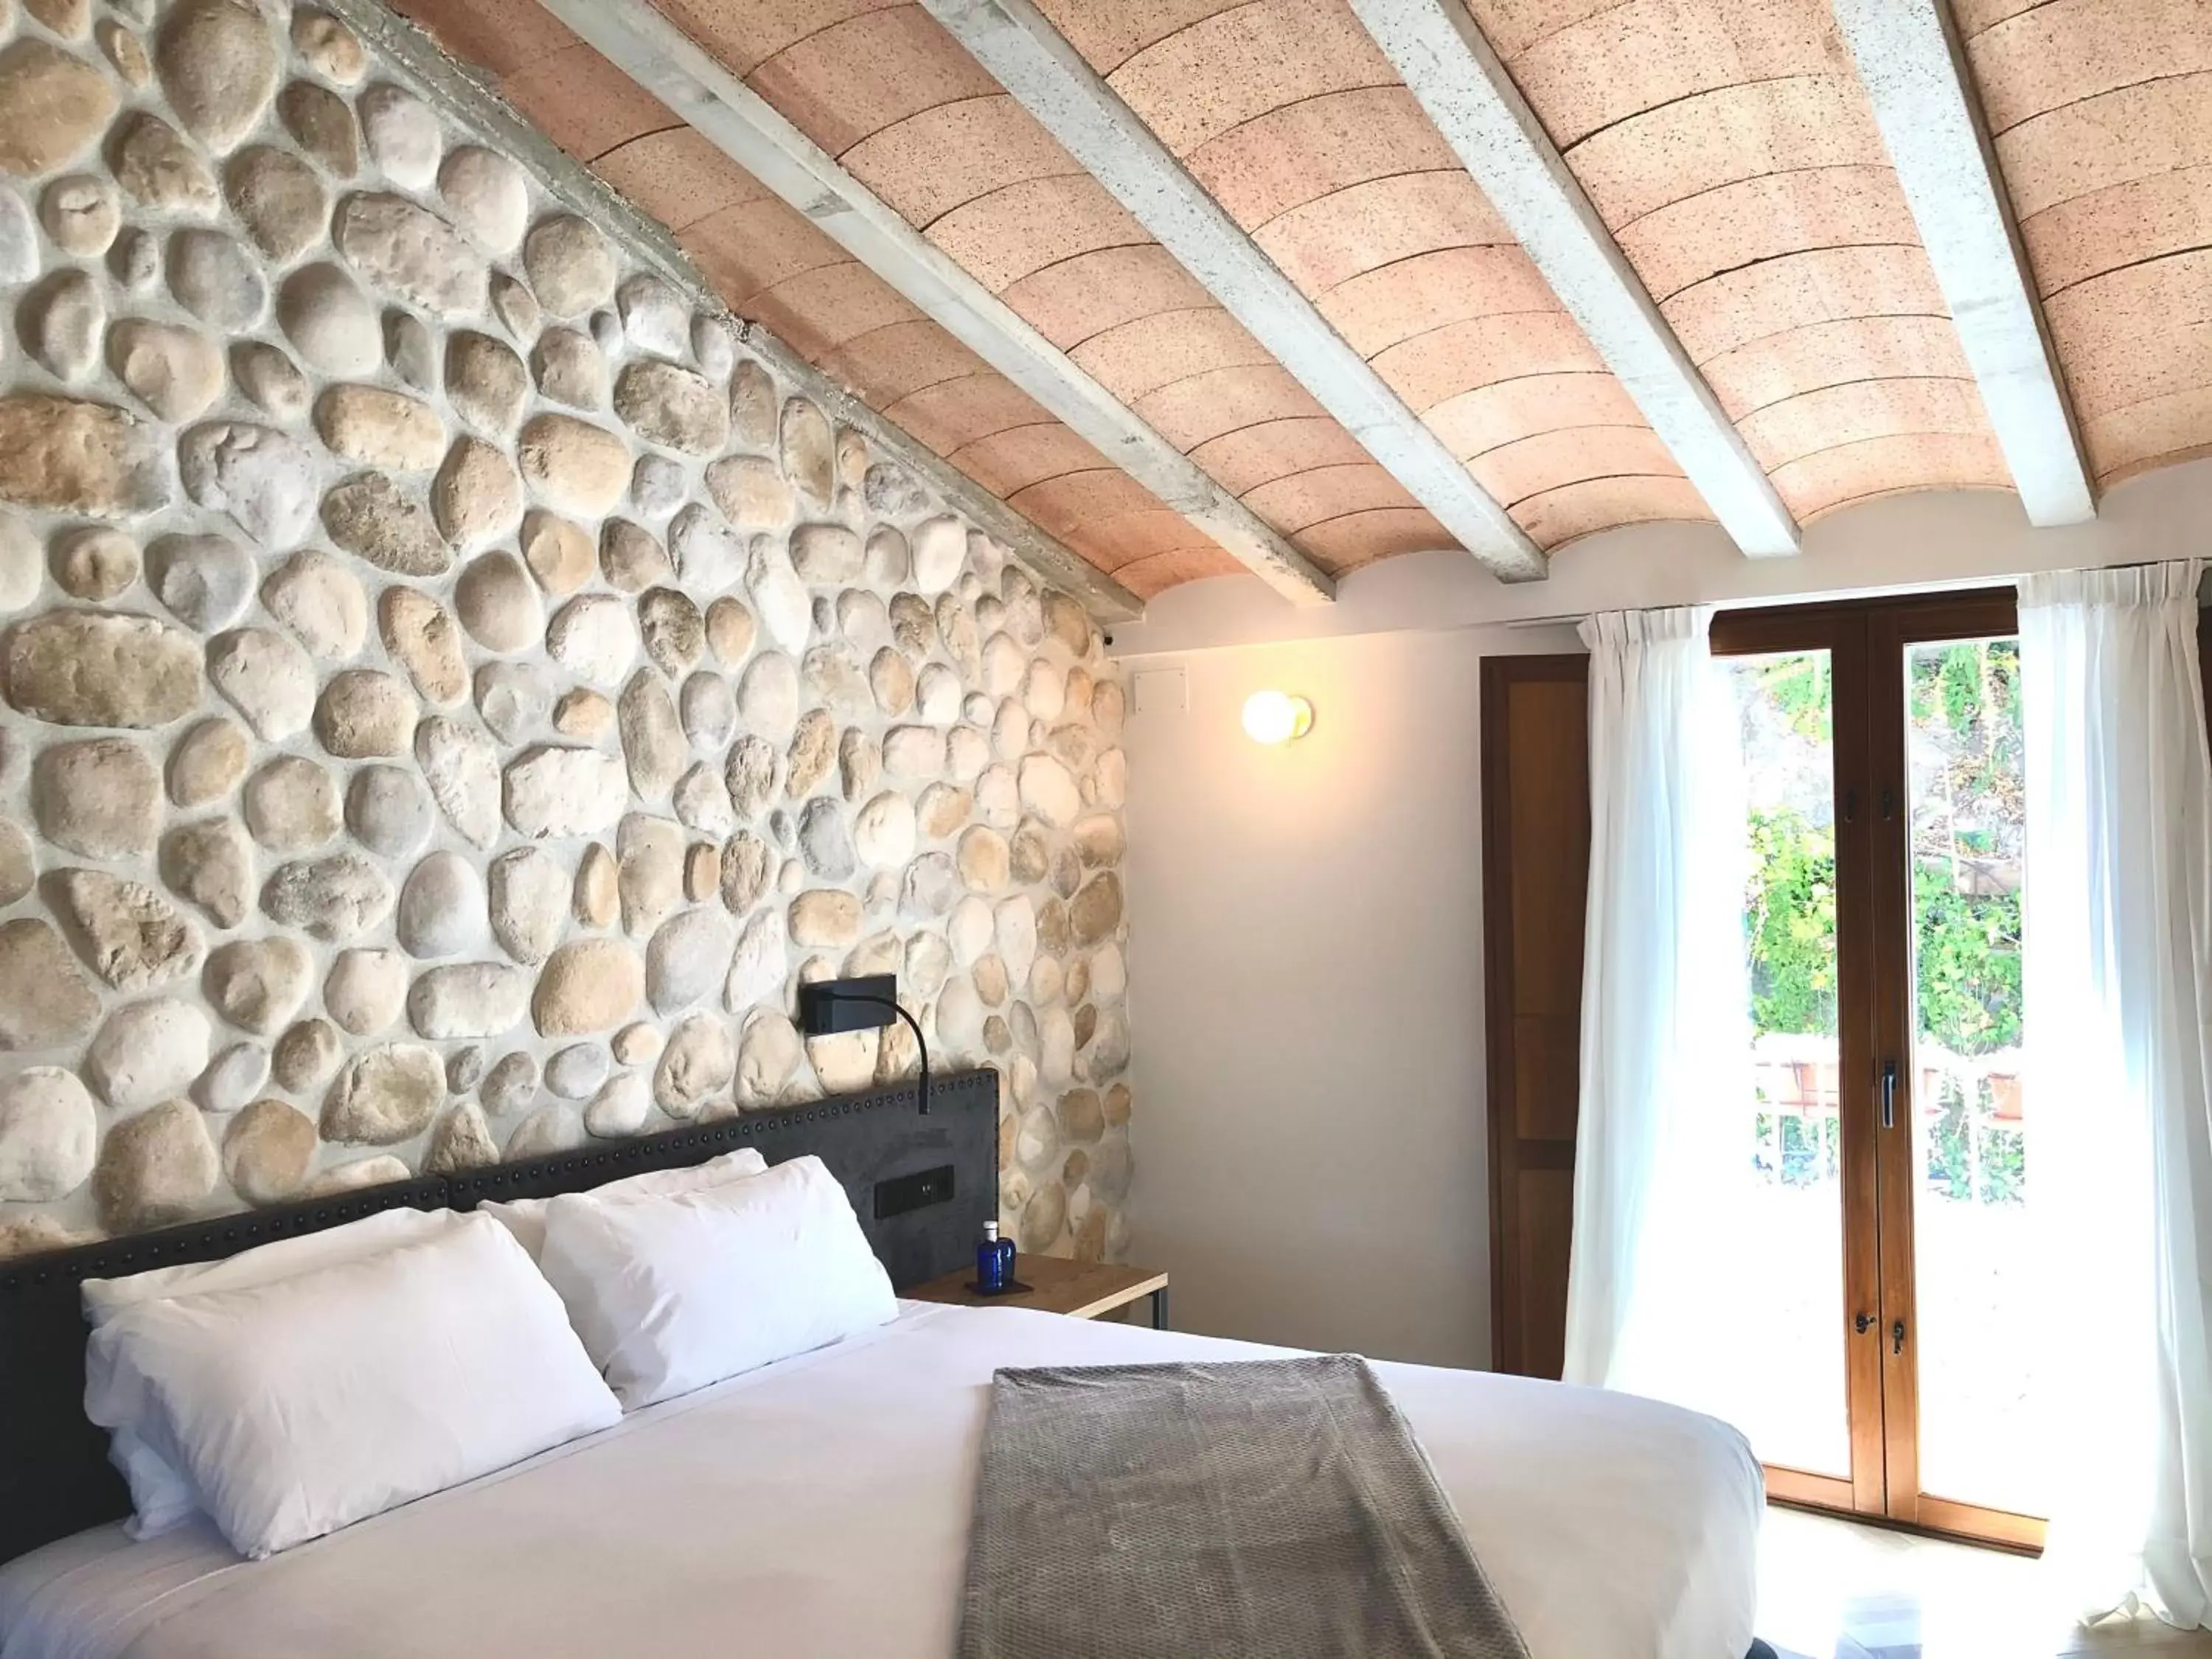 Bed in Hotel Abaco Altea